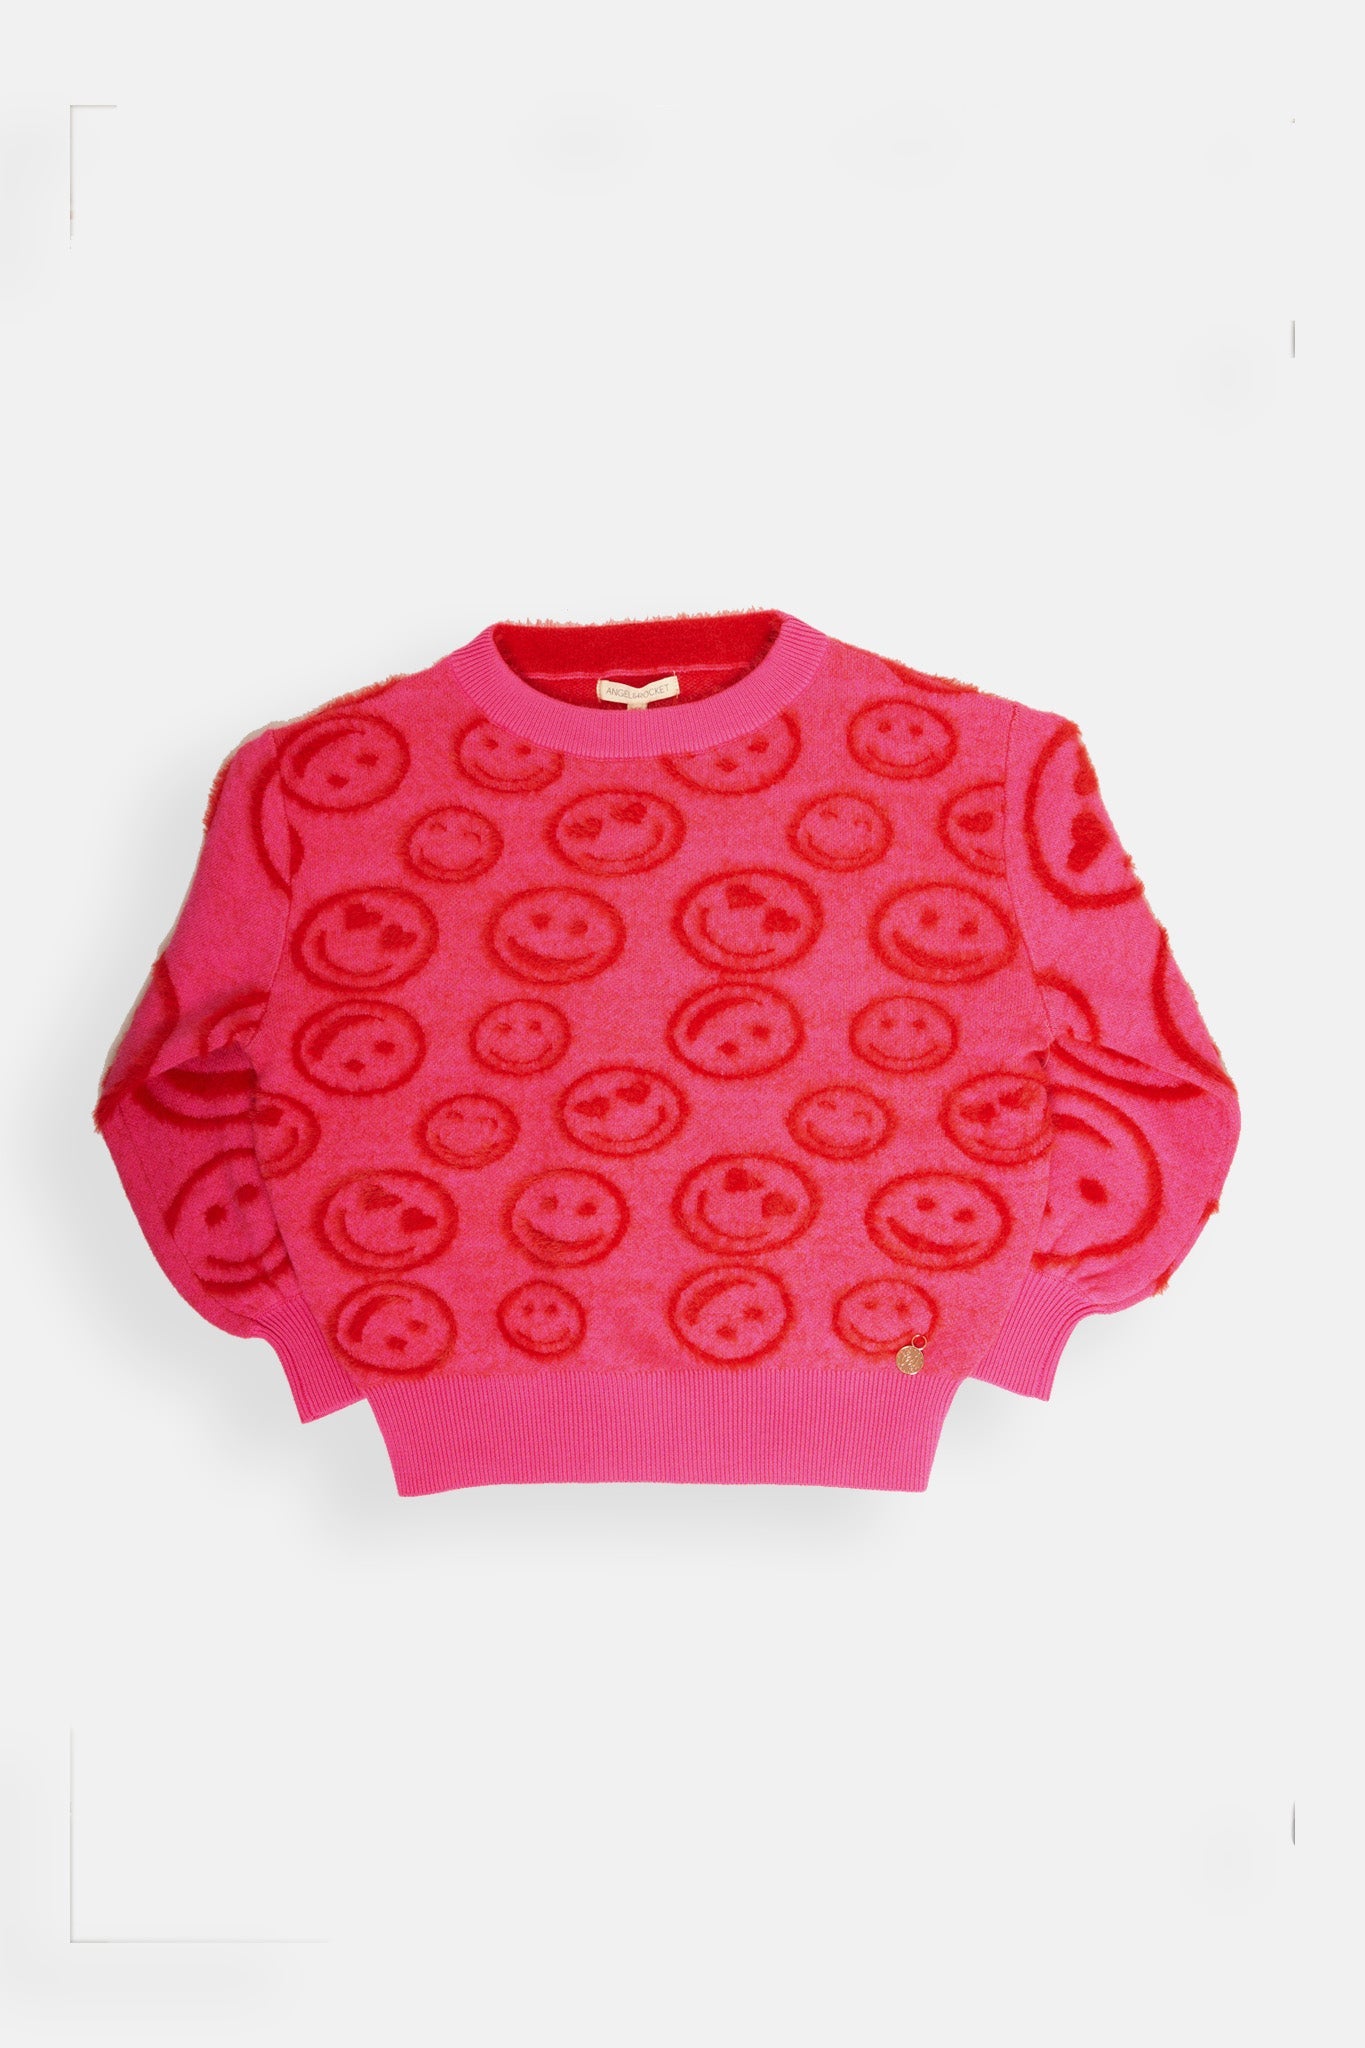 Girls Smiley Face Printed Pink Sweater